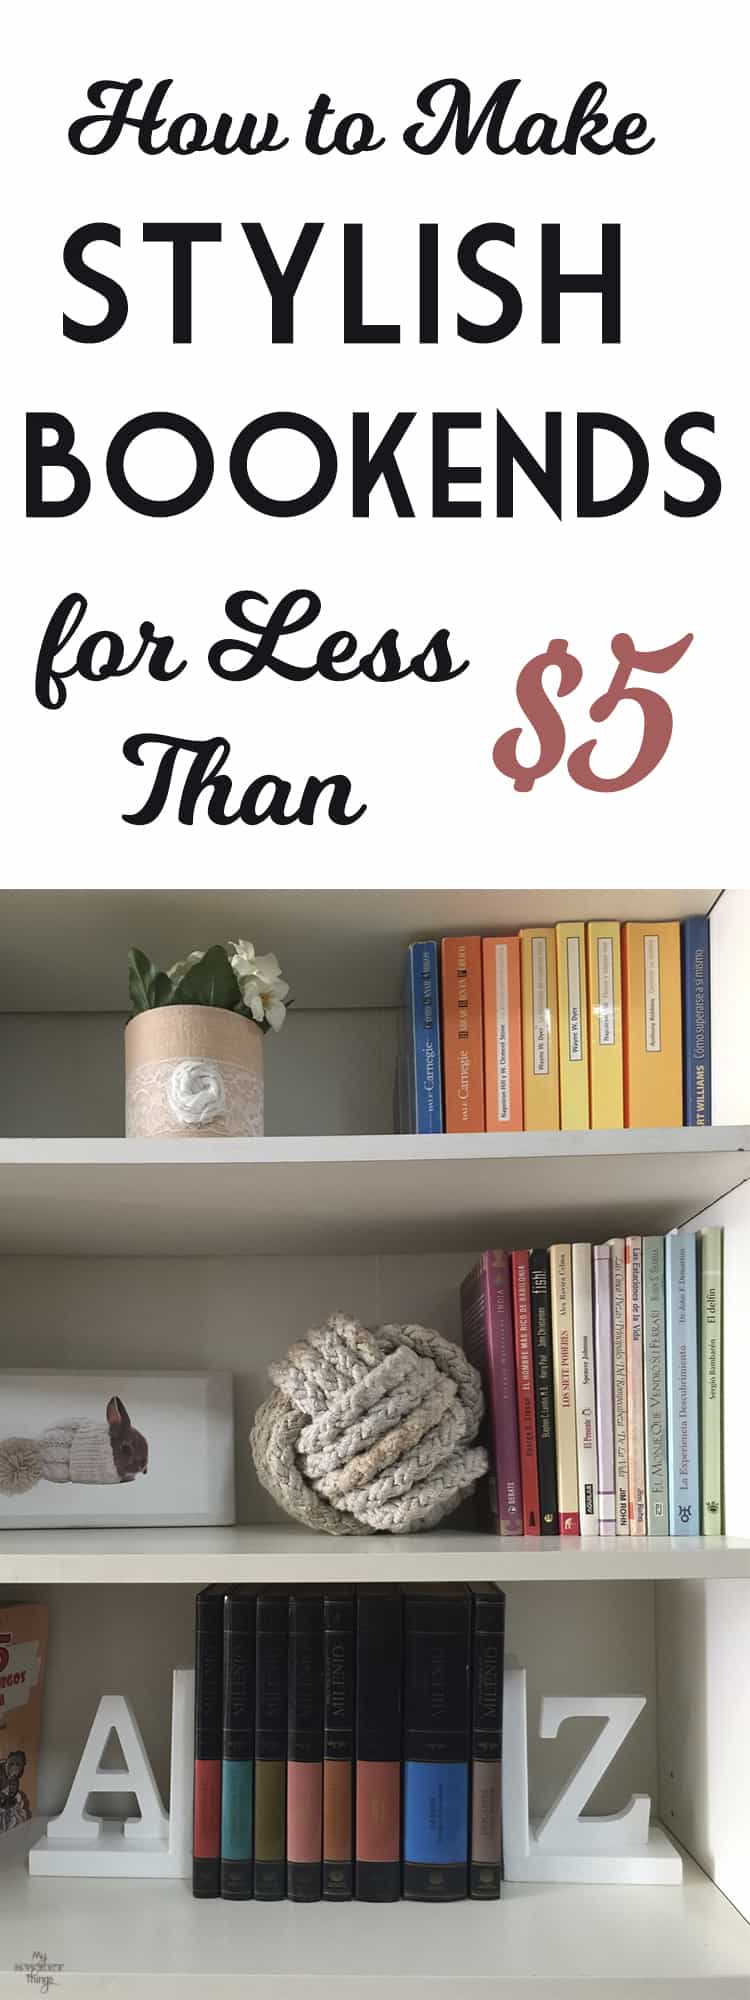 How to make stylish bookends for less than $5 with some scrap wood · Via www.sweethings.net